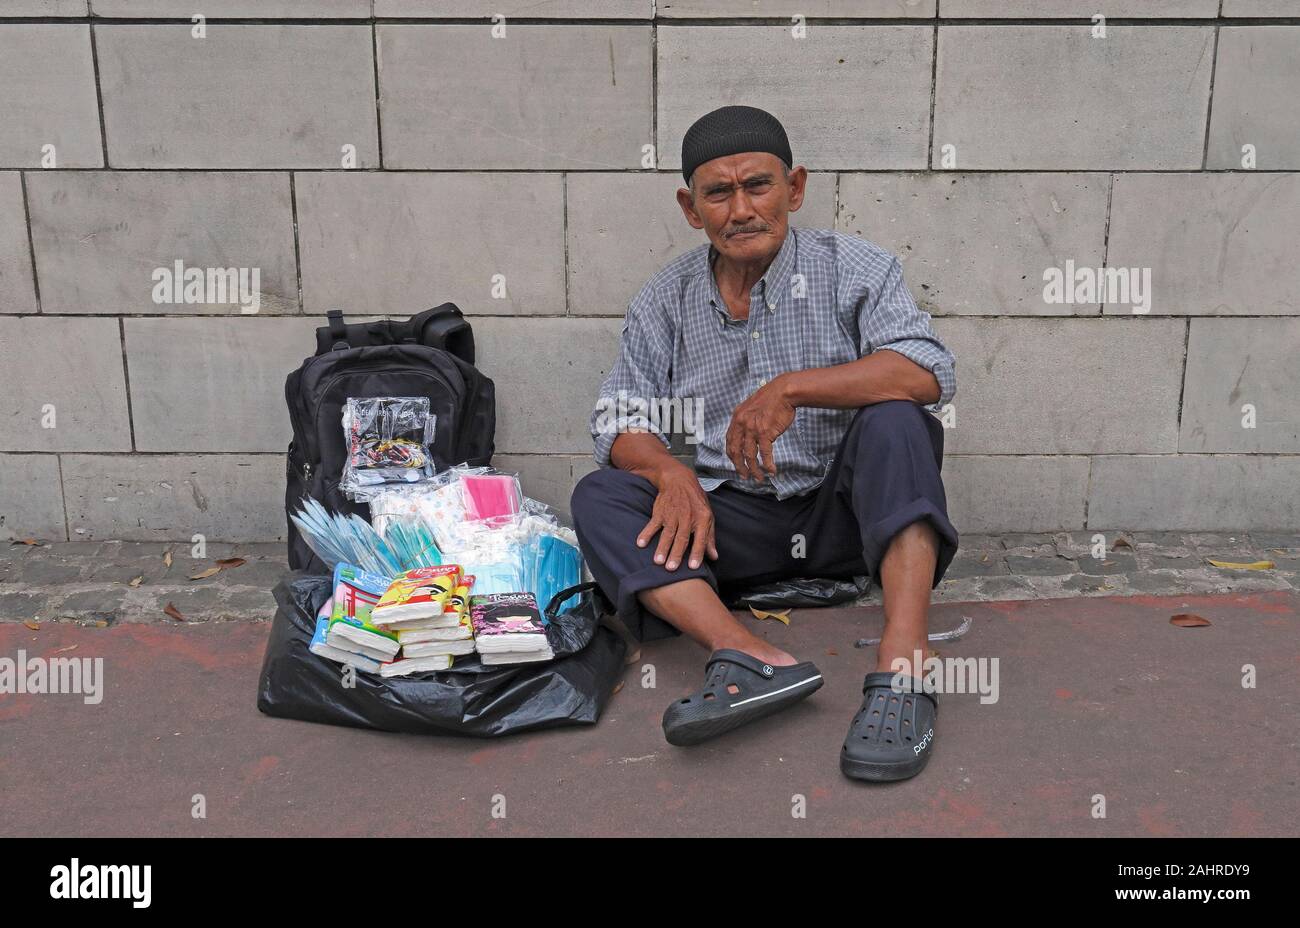 jakarta, indonesia – 2019.12.16: an old man sitting on the pavement in front of grand indonesia shopping mall selling sundry toilet articles Stock Photo